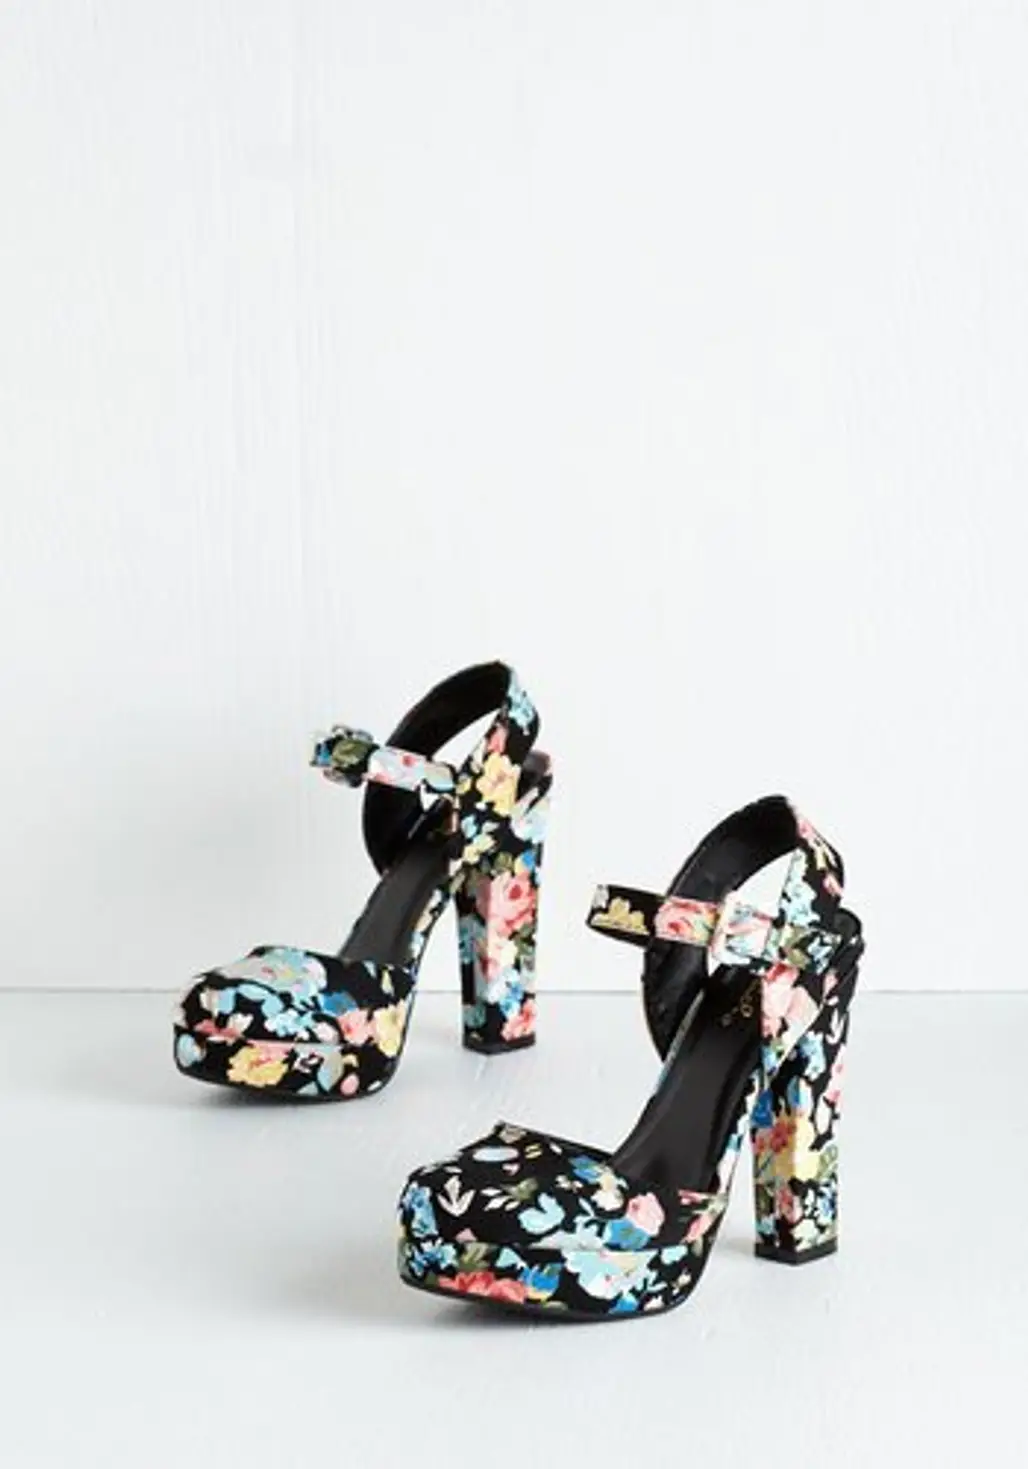 ModCloth Strut a Delight Heel in Floral